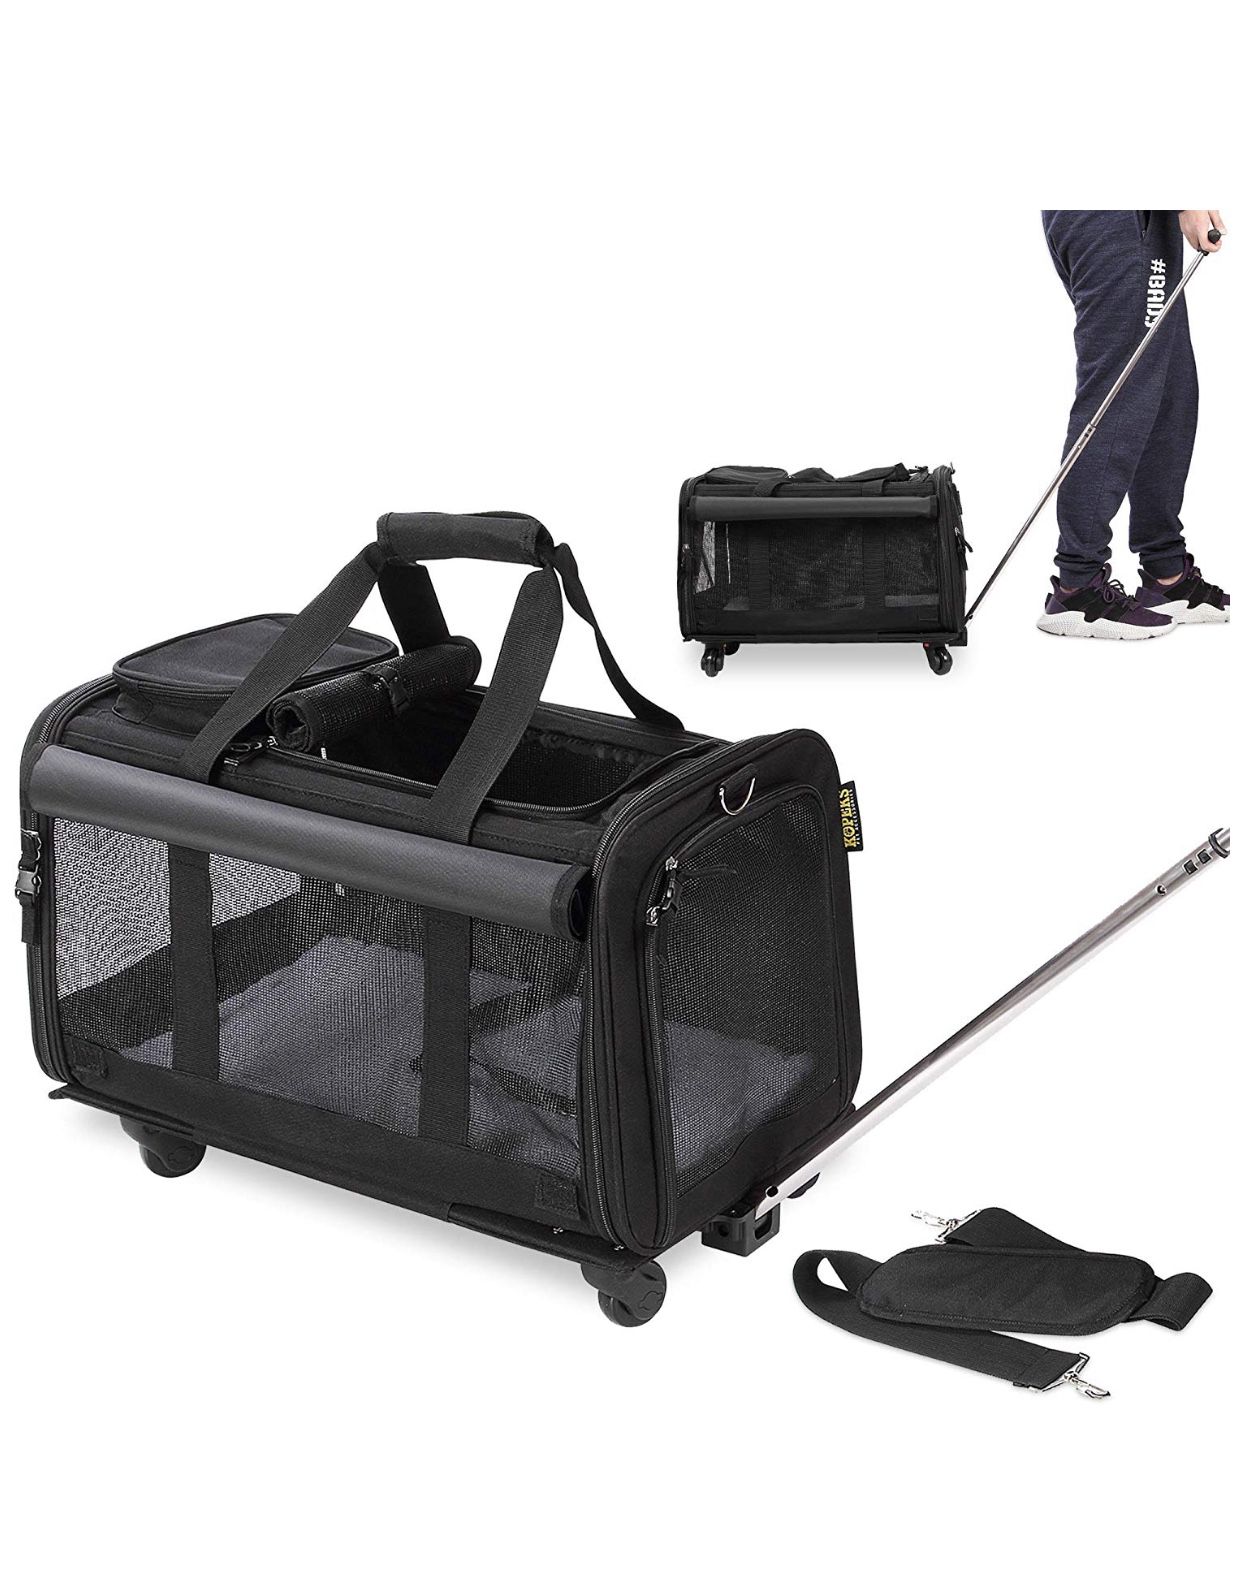 KOPEKS Pet Carrier with Detachable Wheels for Small and Medium Dogs & Cats - Black, Pink.